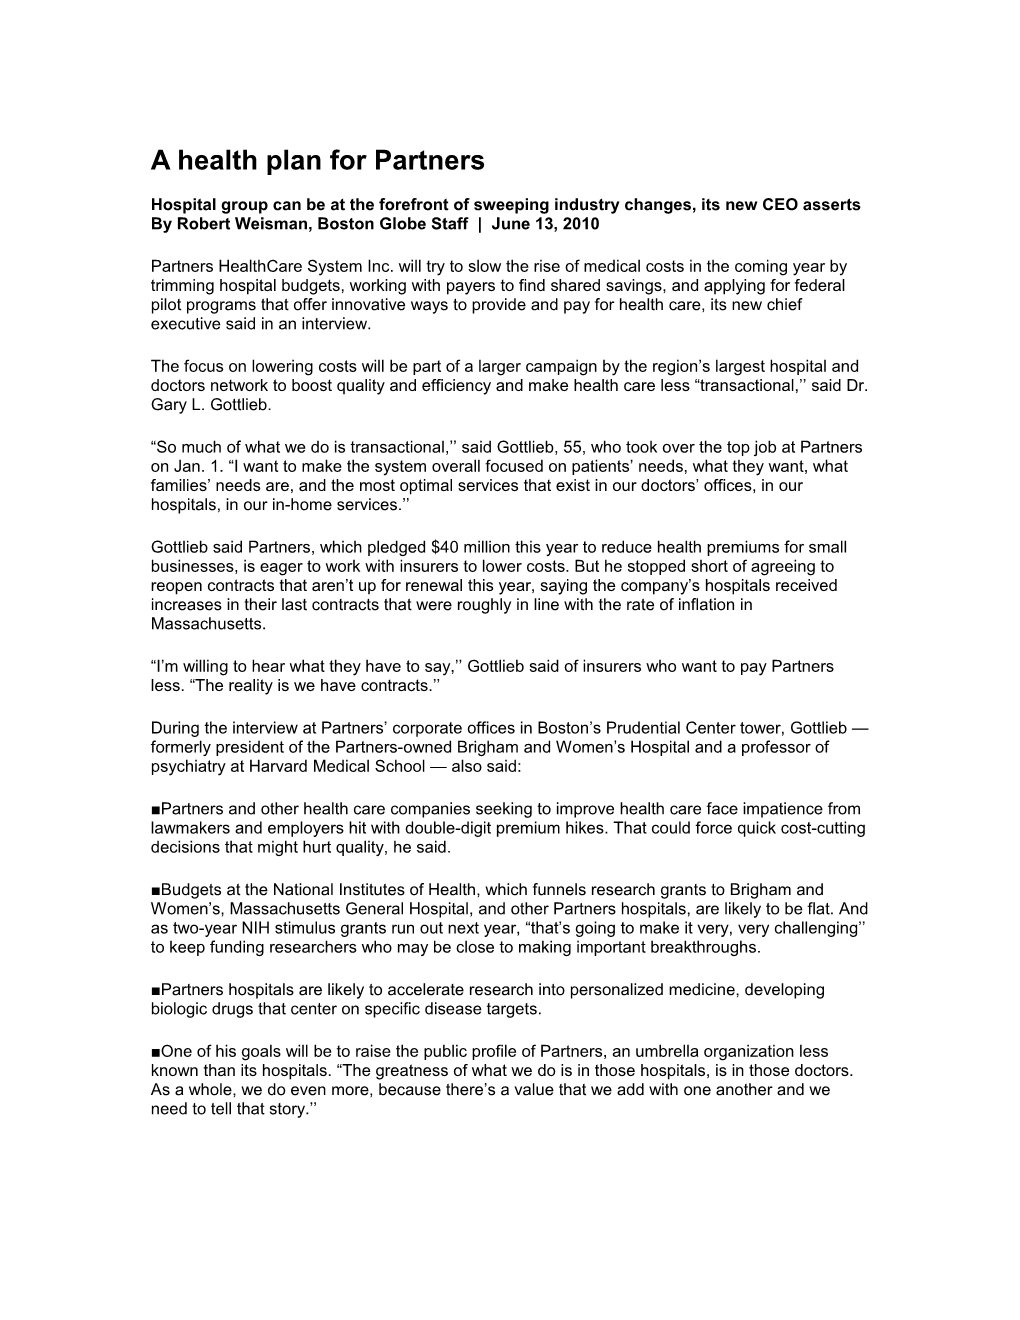 A Health Plan for Partners